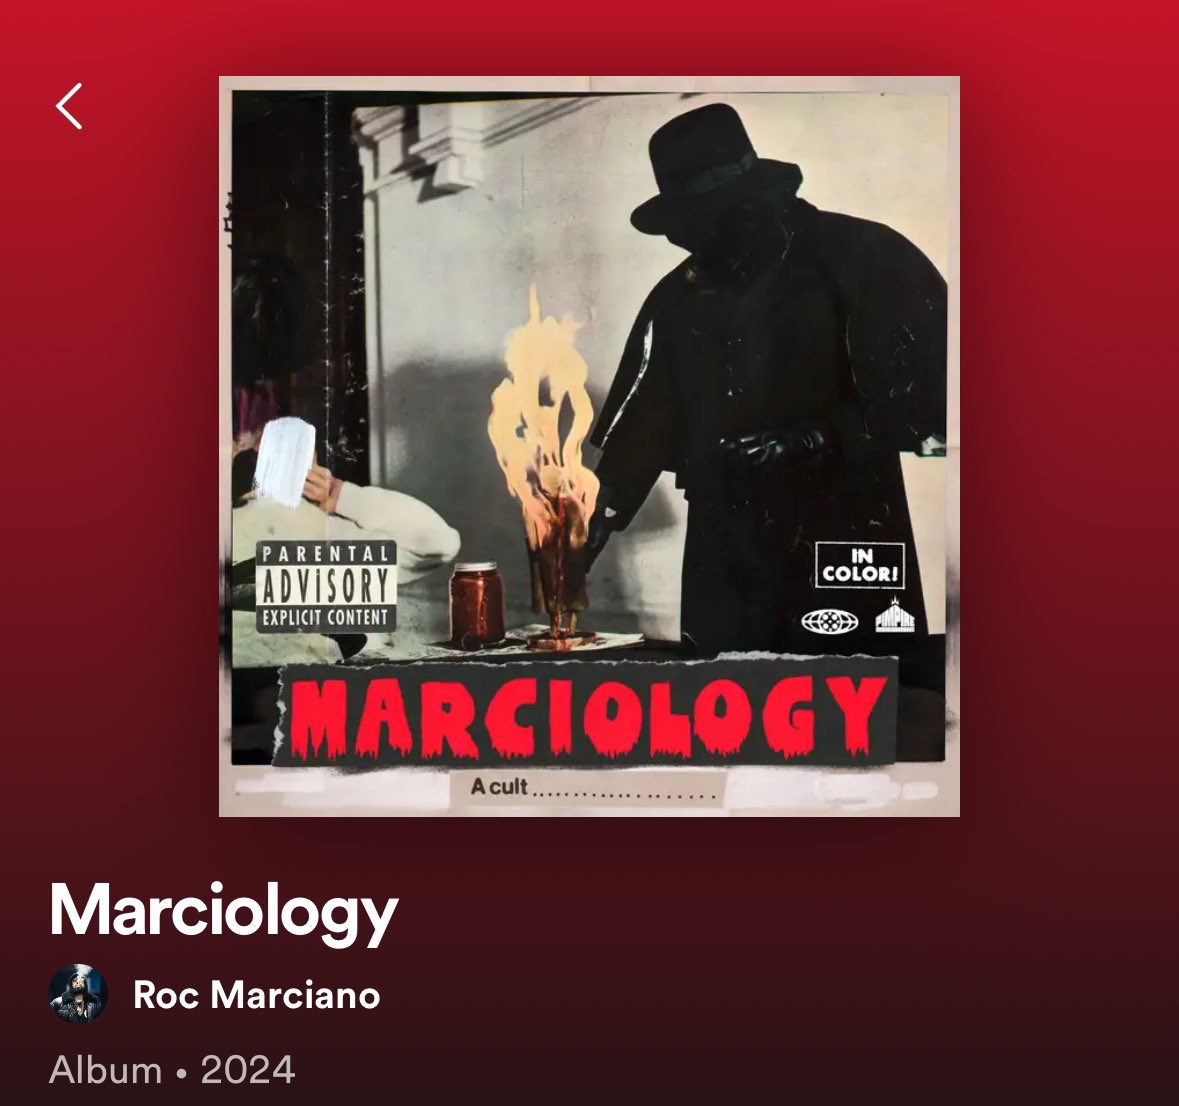 Nobody told me Roc Marci dropped an album this year ??!